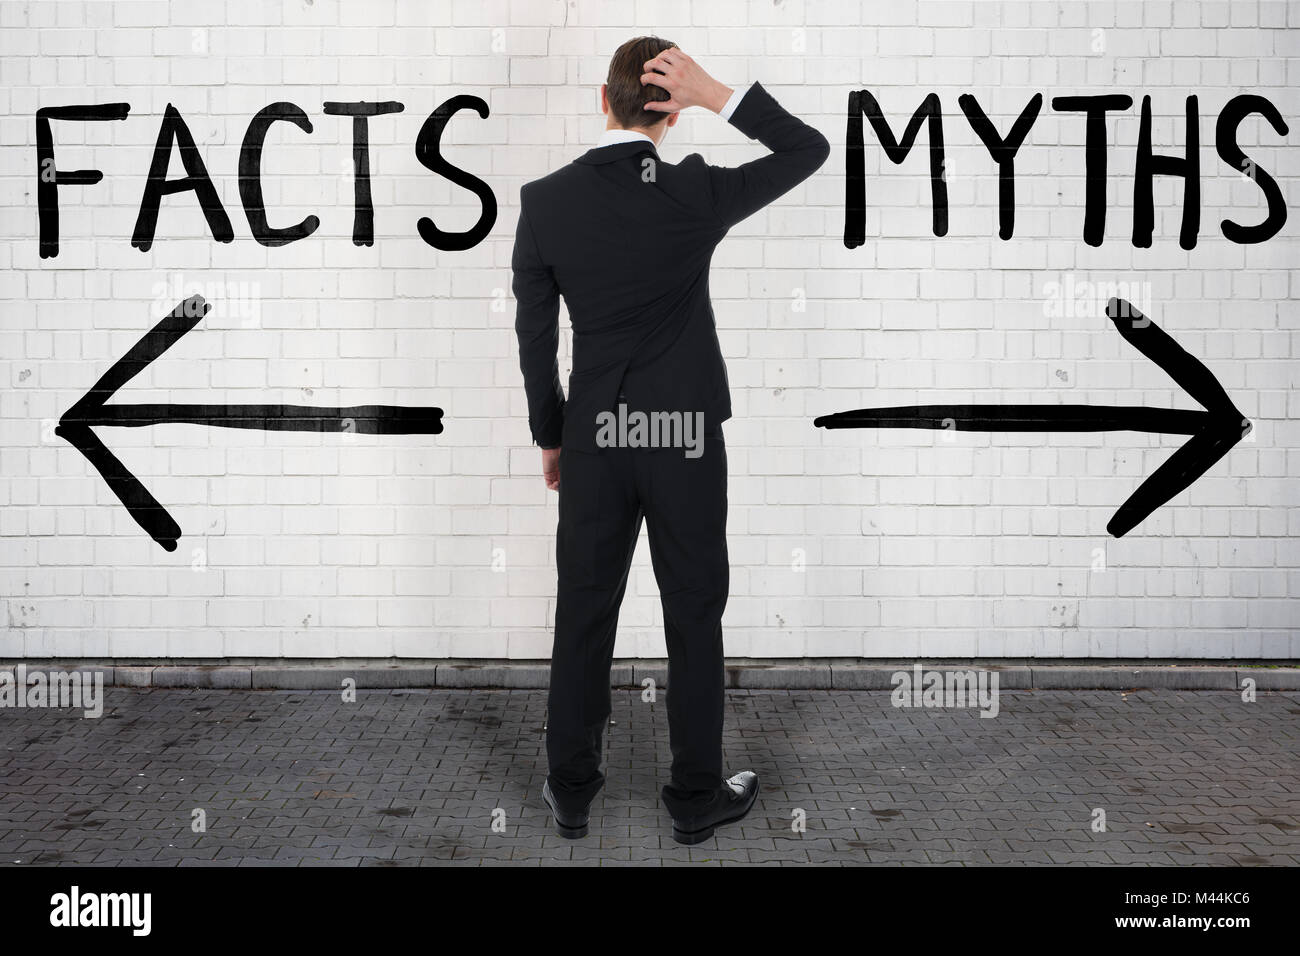 Rear view of confused businessman looking at arrow signs below facts and myths text Stock Photo